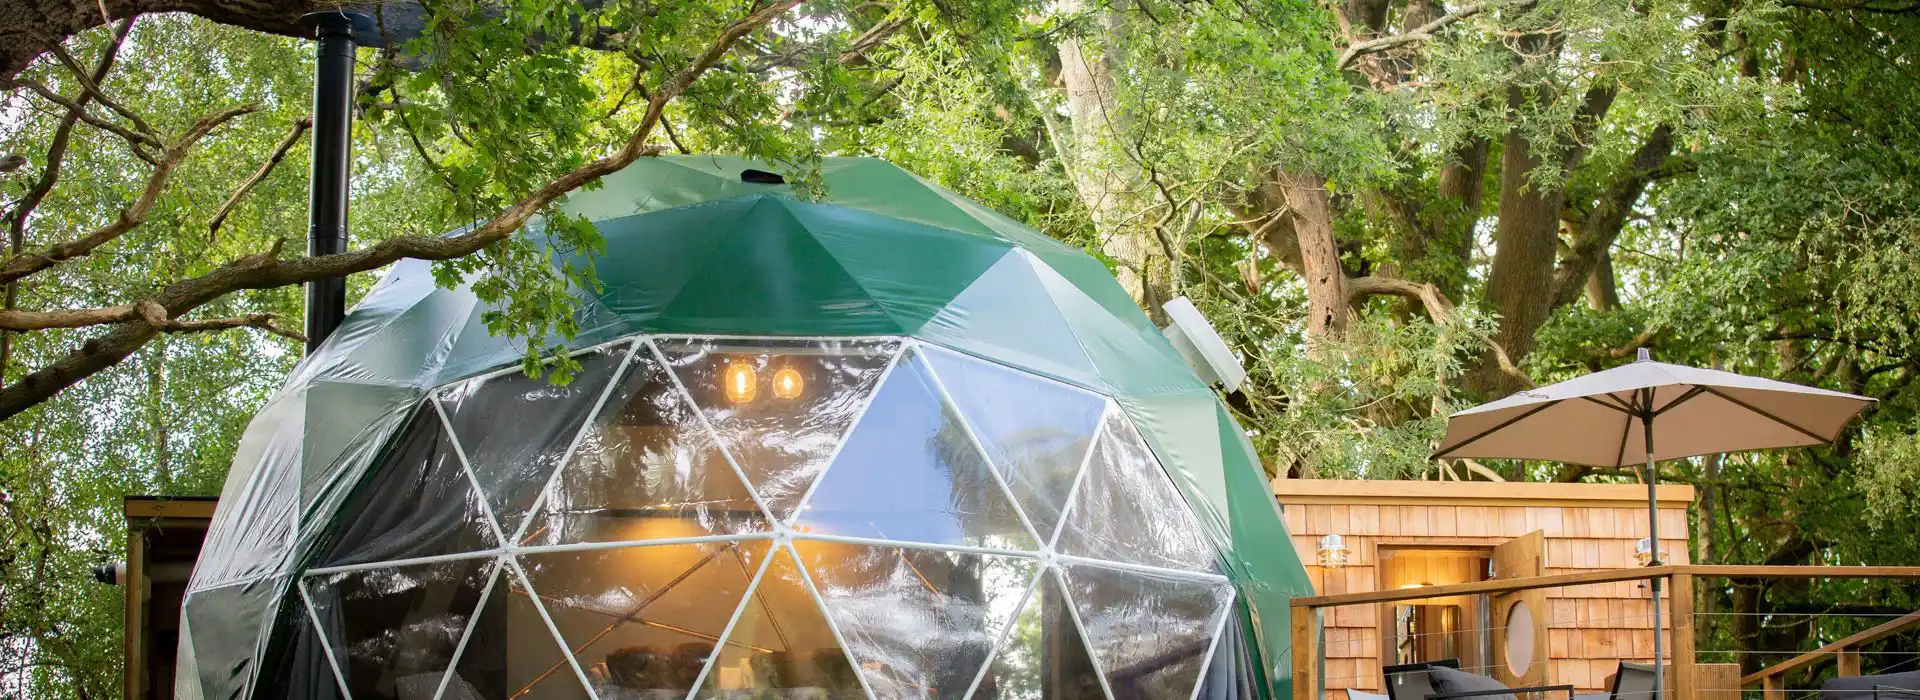 Woodland glamping in the UK